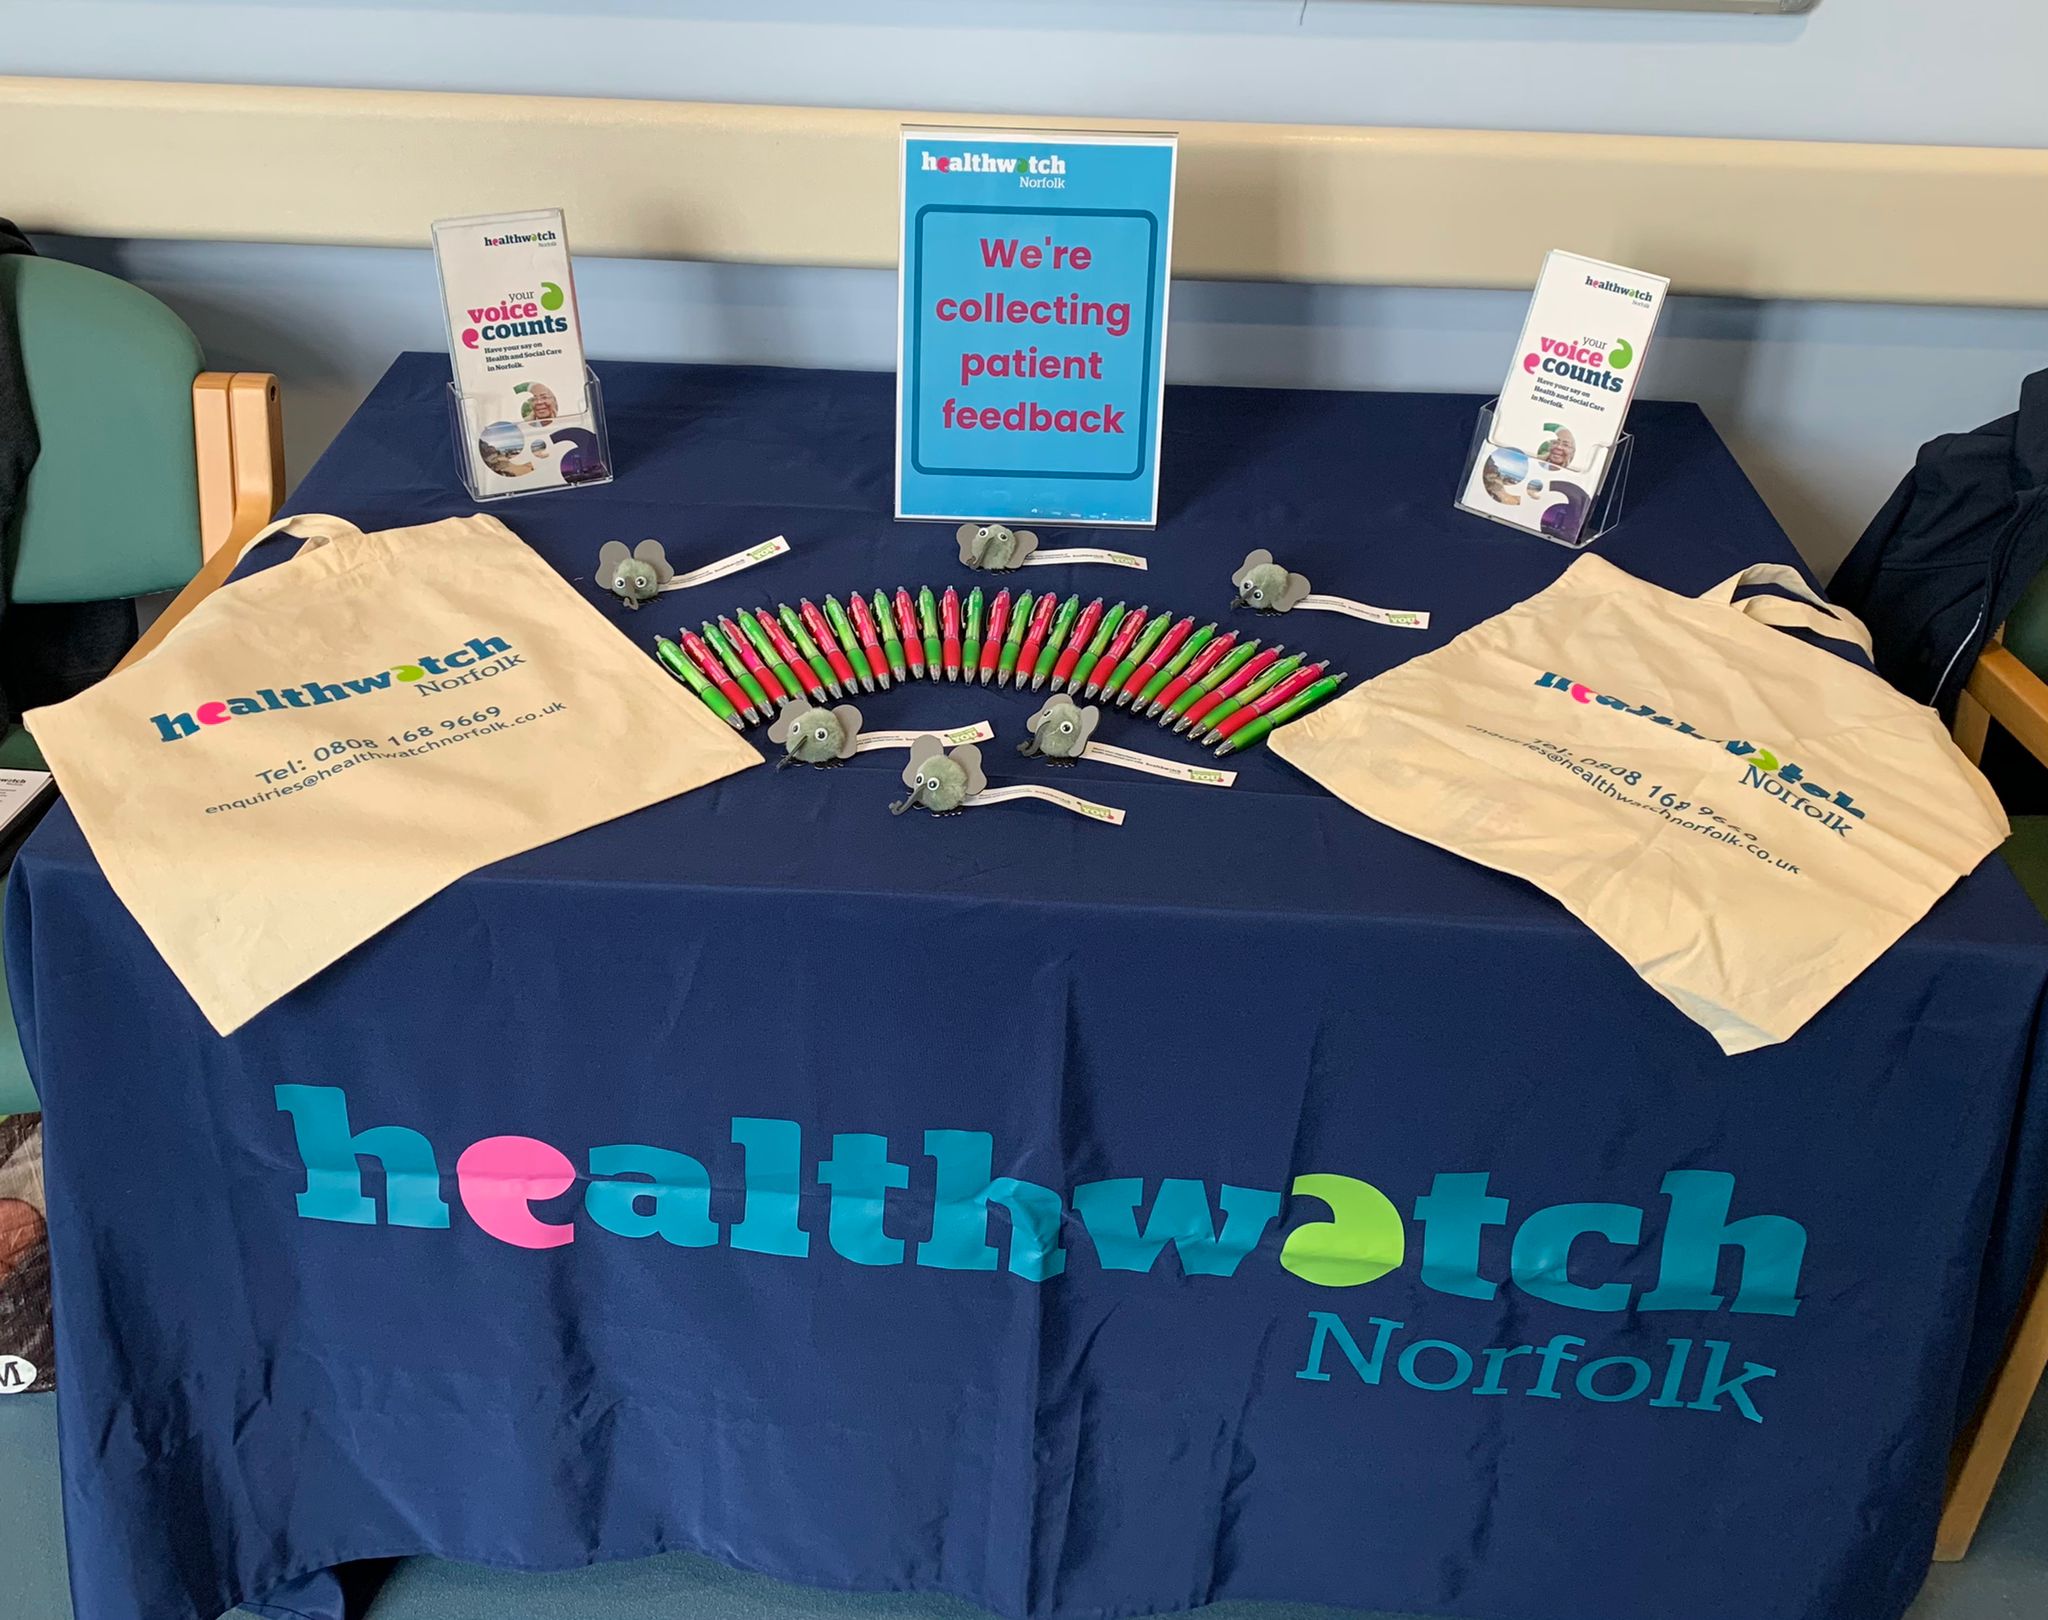 image shows a table with dark blue tablecloth and the words healthwatch norfolk printed on. On the table are two healthwatch bags, a fan of green and pink pens. There is a sign saying 'we are collecting patient feedback' and some leaflets